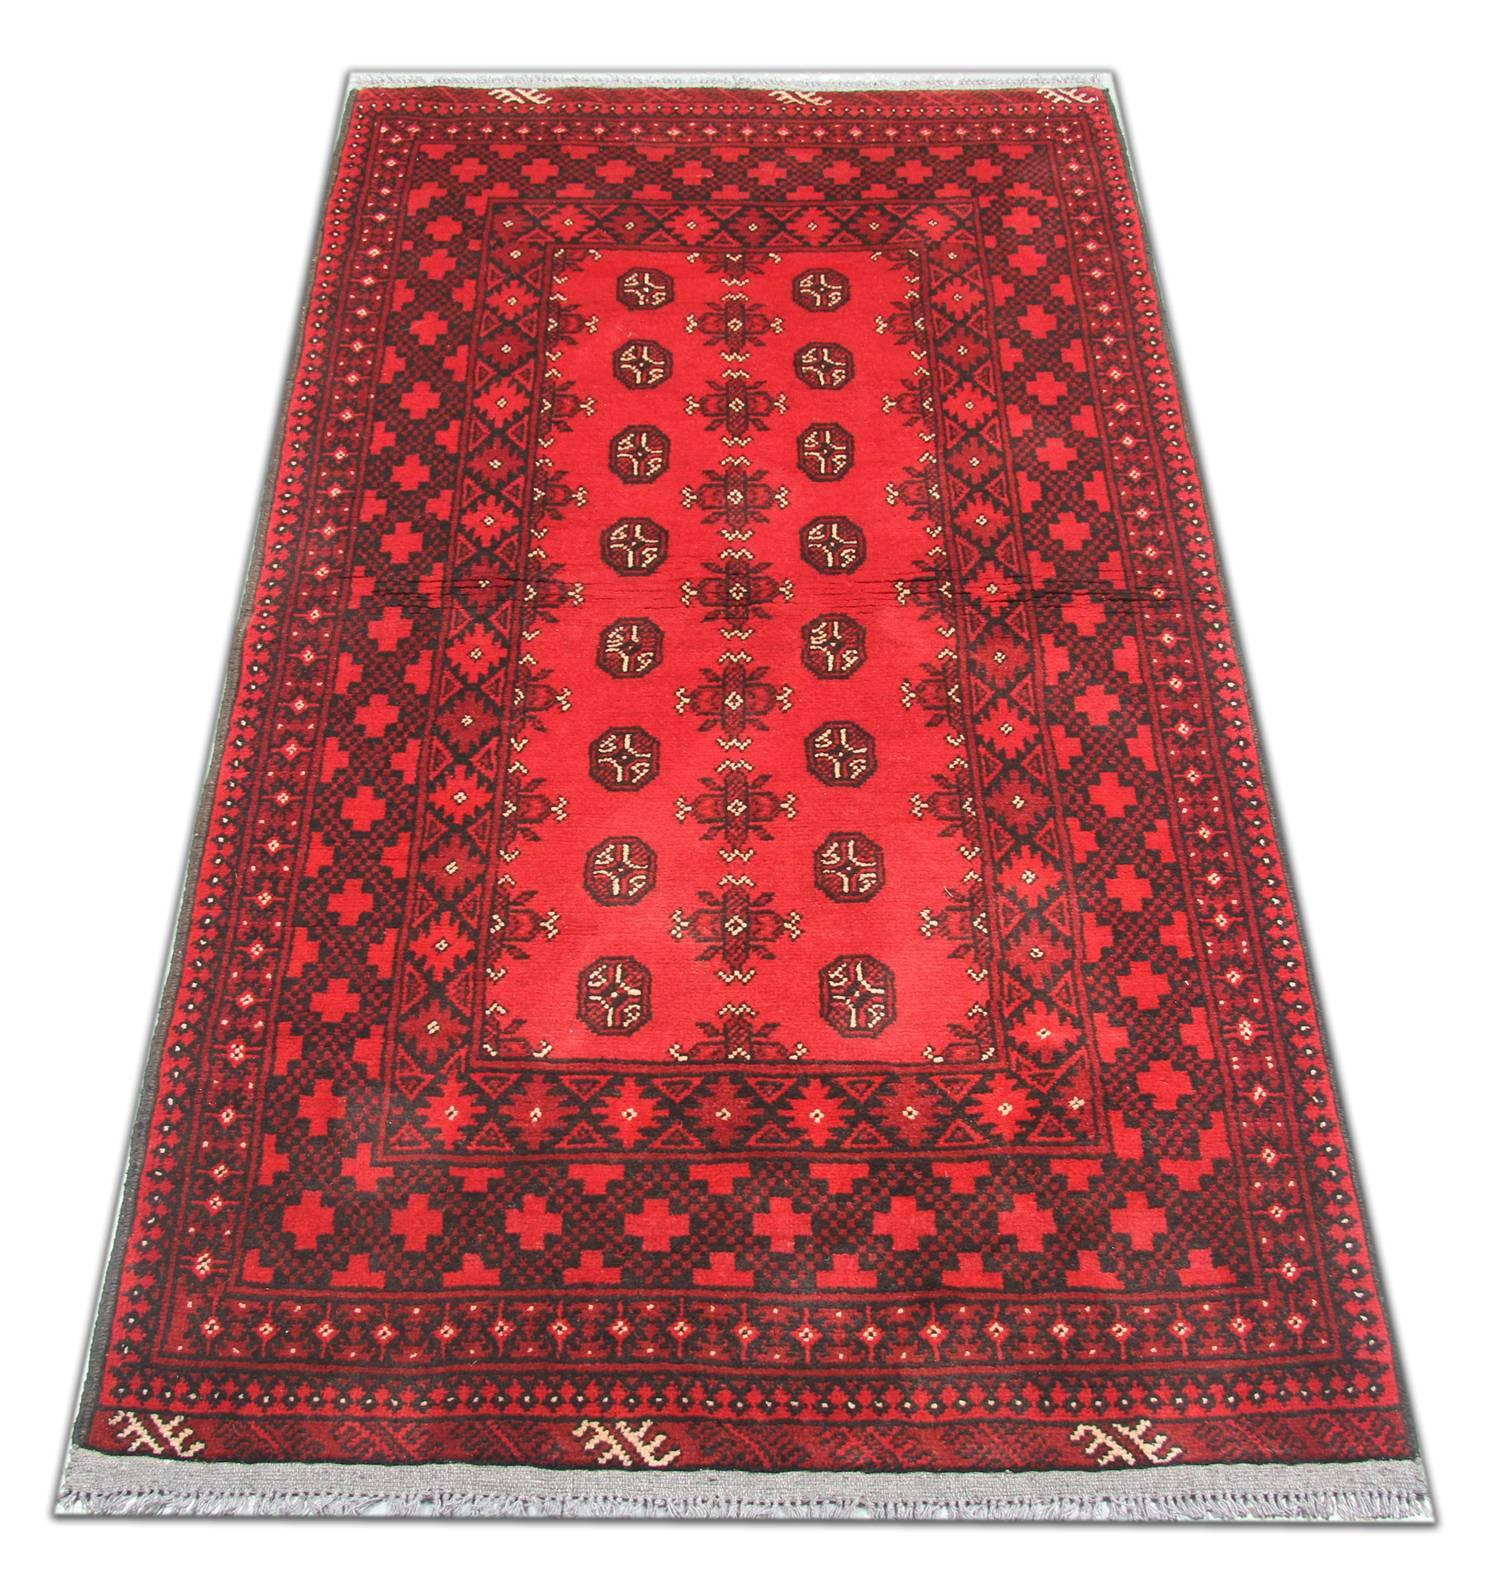 This is an example of fine Afghan red rug made by highly skilled Turkman handmade rugs weavers in the north of Afghanistan. They have used hand spun wool and 100% organic dyes for the production of these wool rugs. This tribal rug has repeating